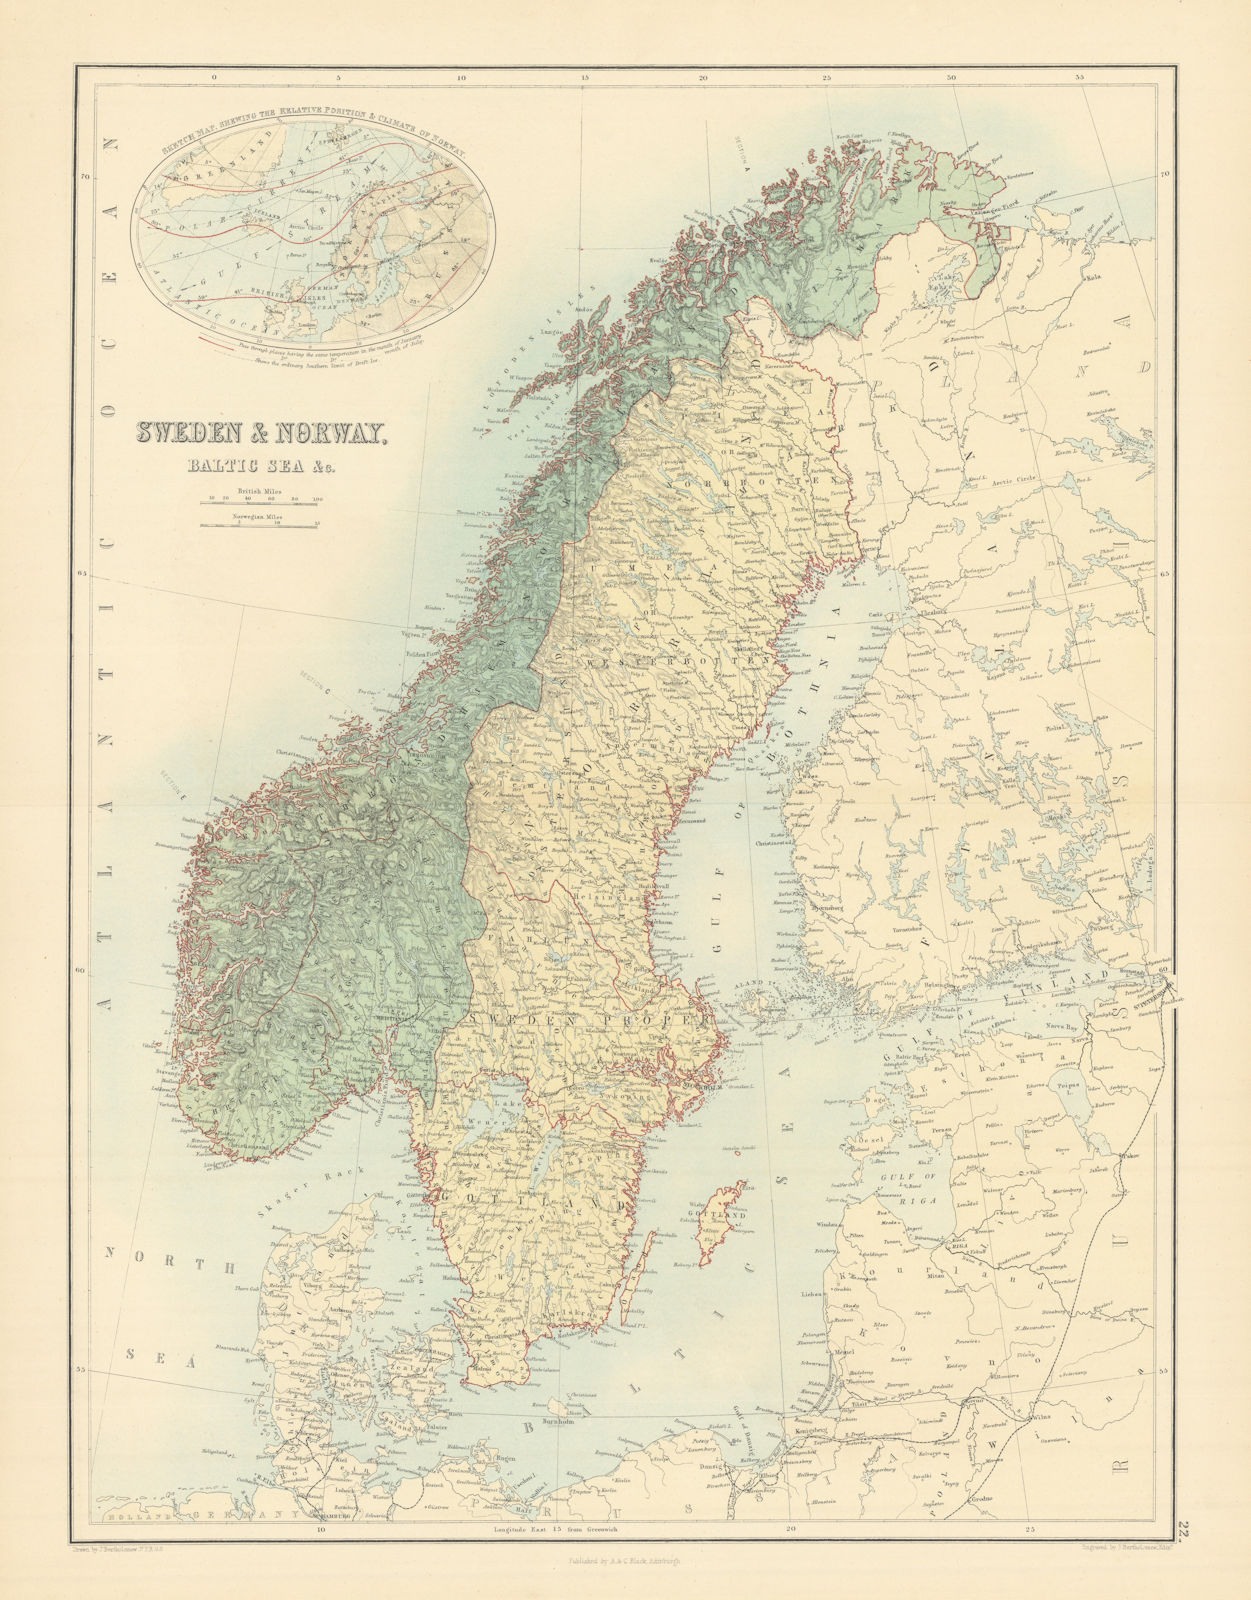 Associate Product Sweden, Norway & the Baltic Sea. Scandinavia. BARTHOLOMEW 1862 old antique map